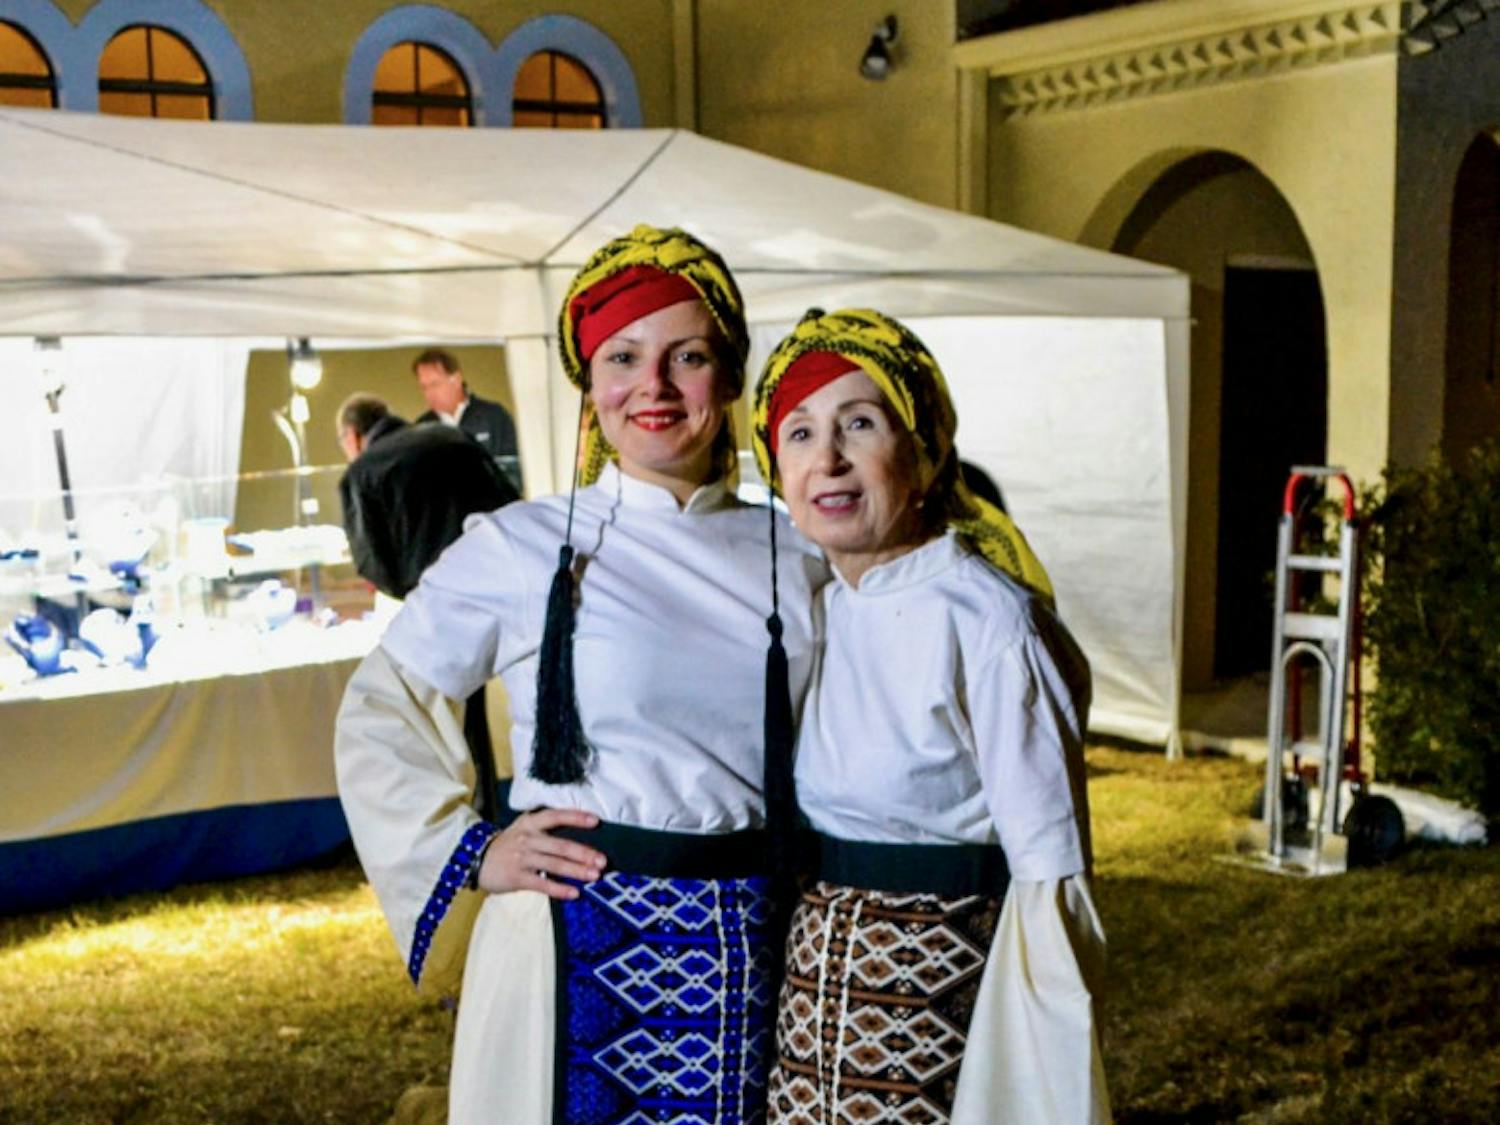 Massina Arvanitis, from Canada, and Olga Petrovic, from Gainesville, sport traditional western Greek attire from the 1800s at the Gainesville Greek Festival. They helped put on this festival to maintain their culture and to fundraise for the St. Elizabeth Greek Orthodox Church.
&nbsp;